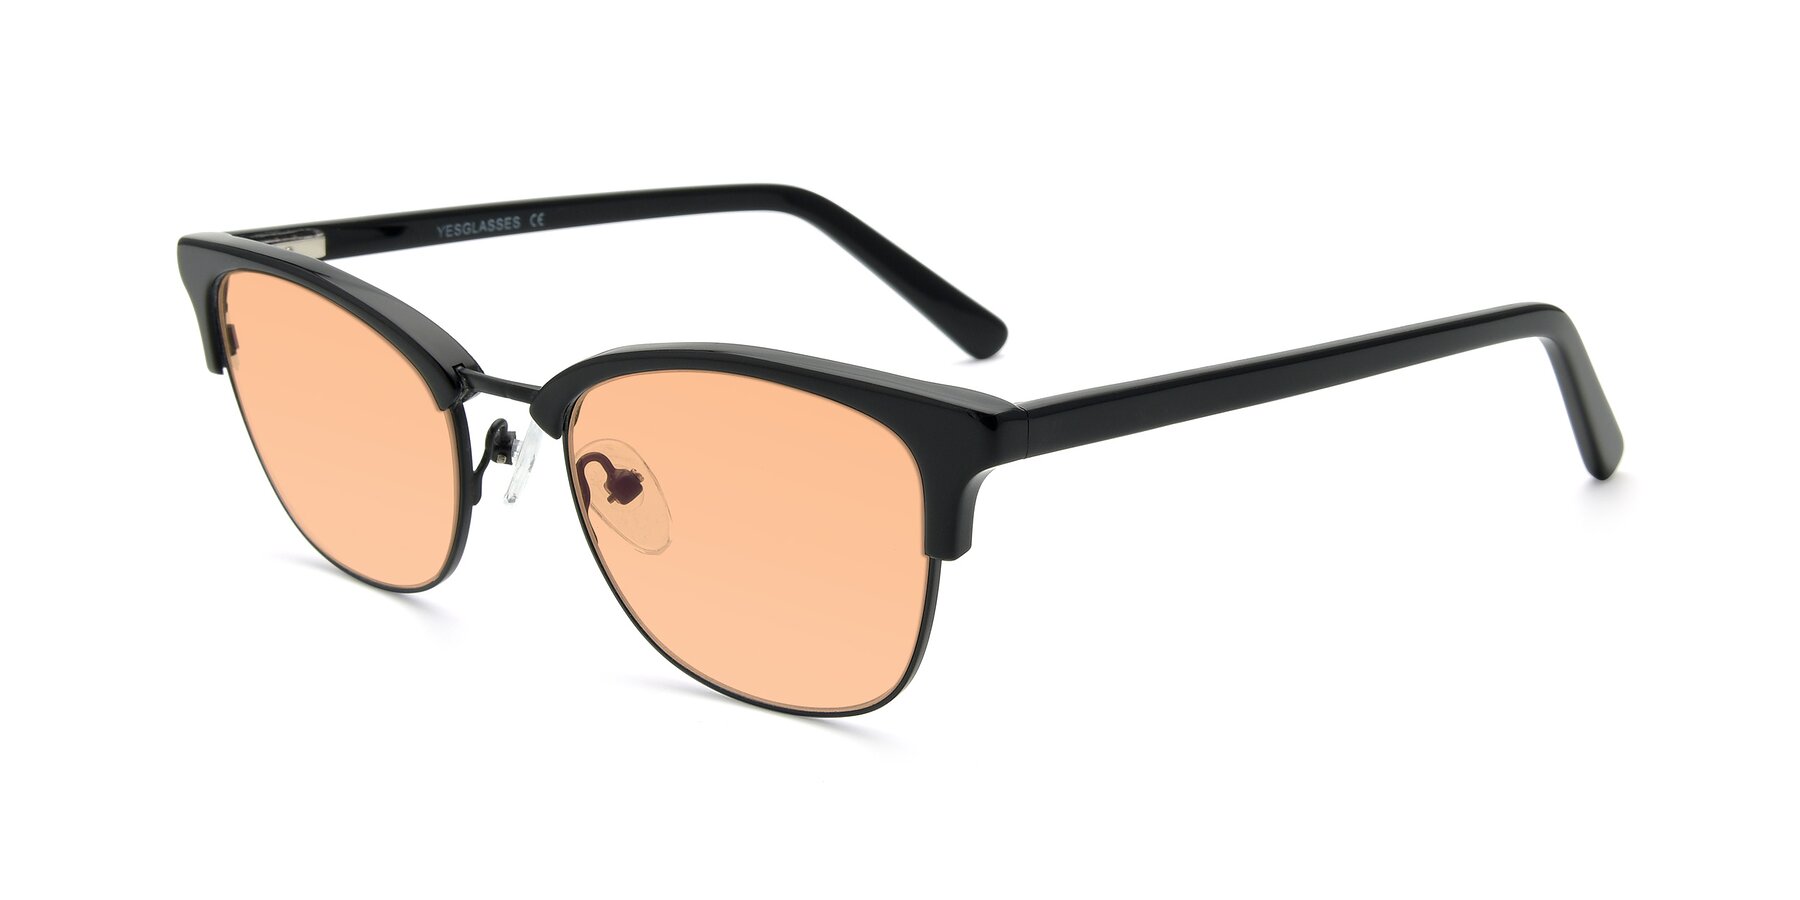 Angle of 17463 in Black with Light Orange Tinted Lenses